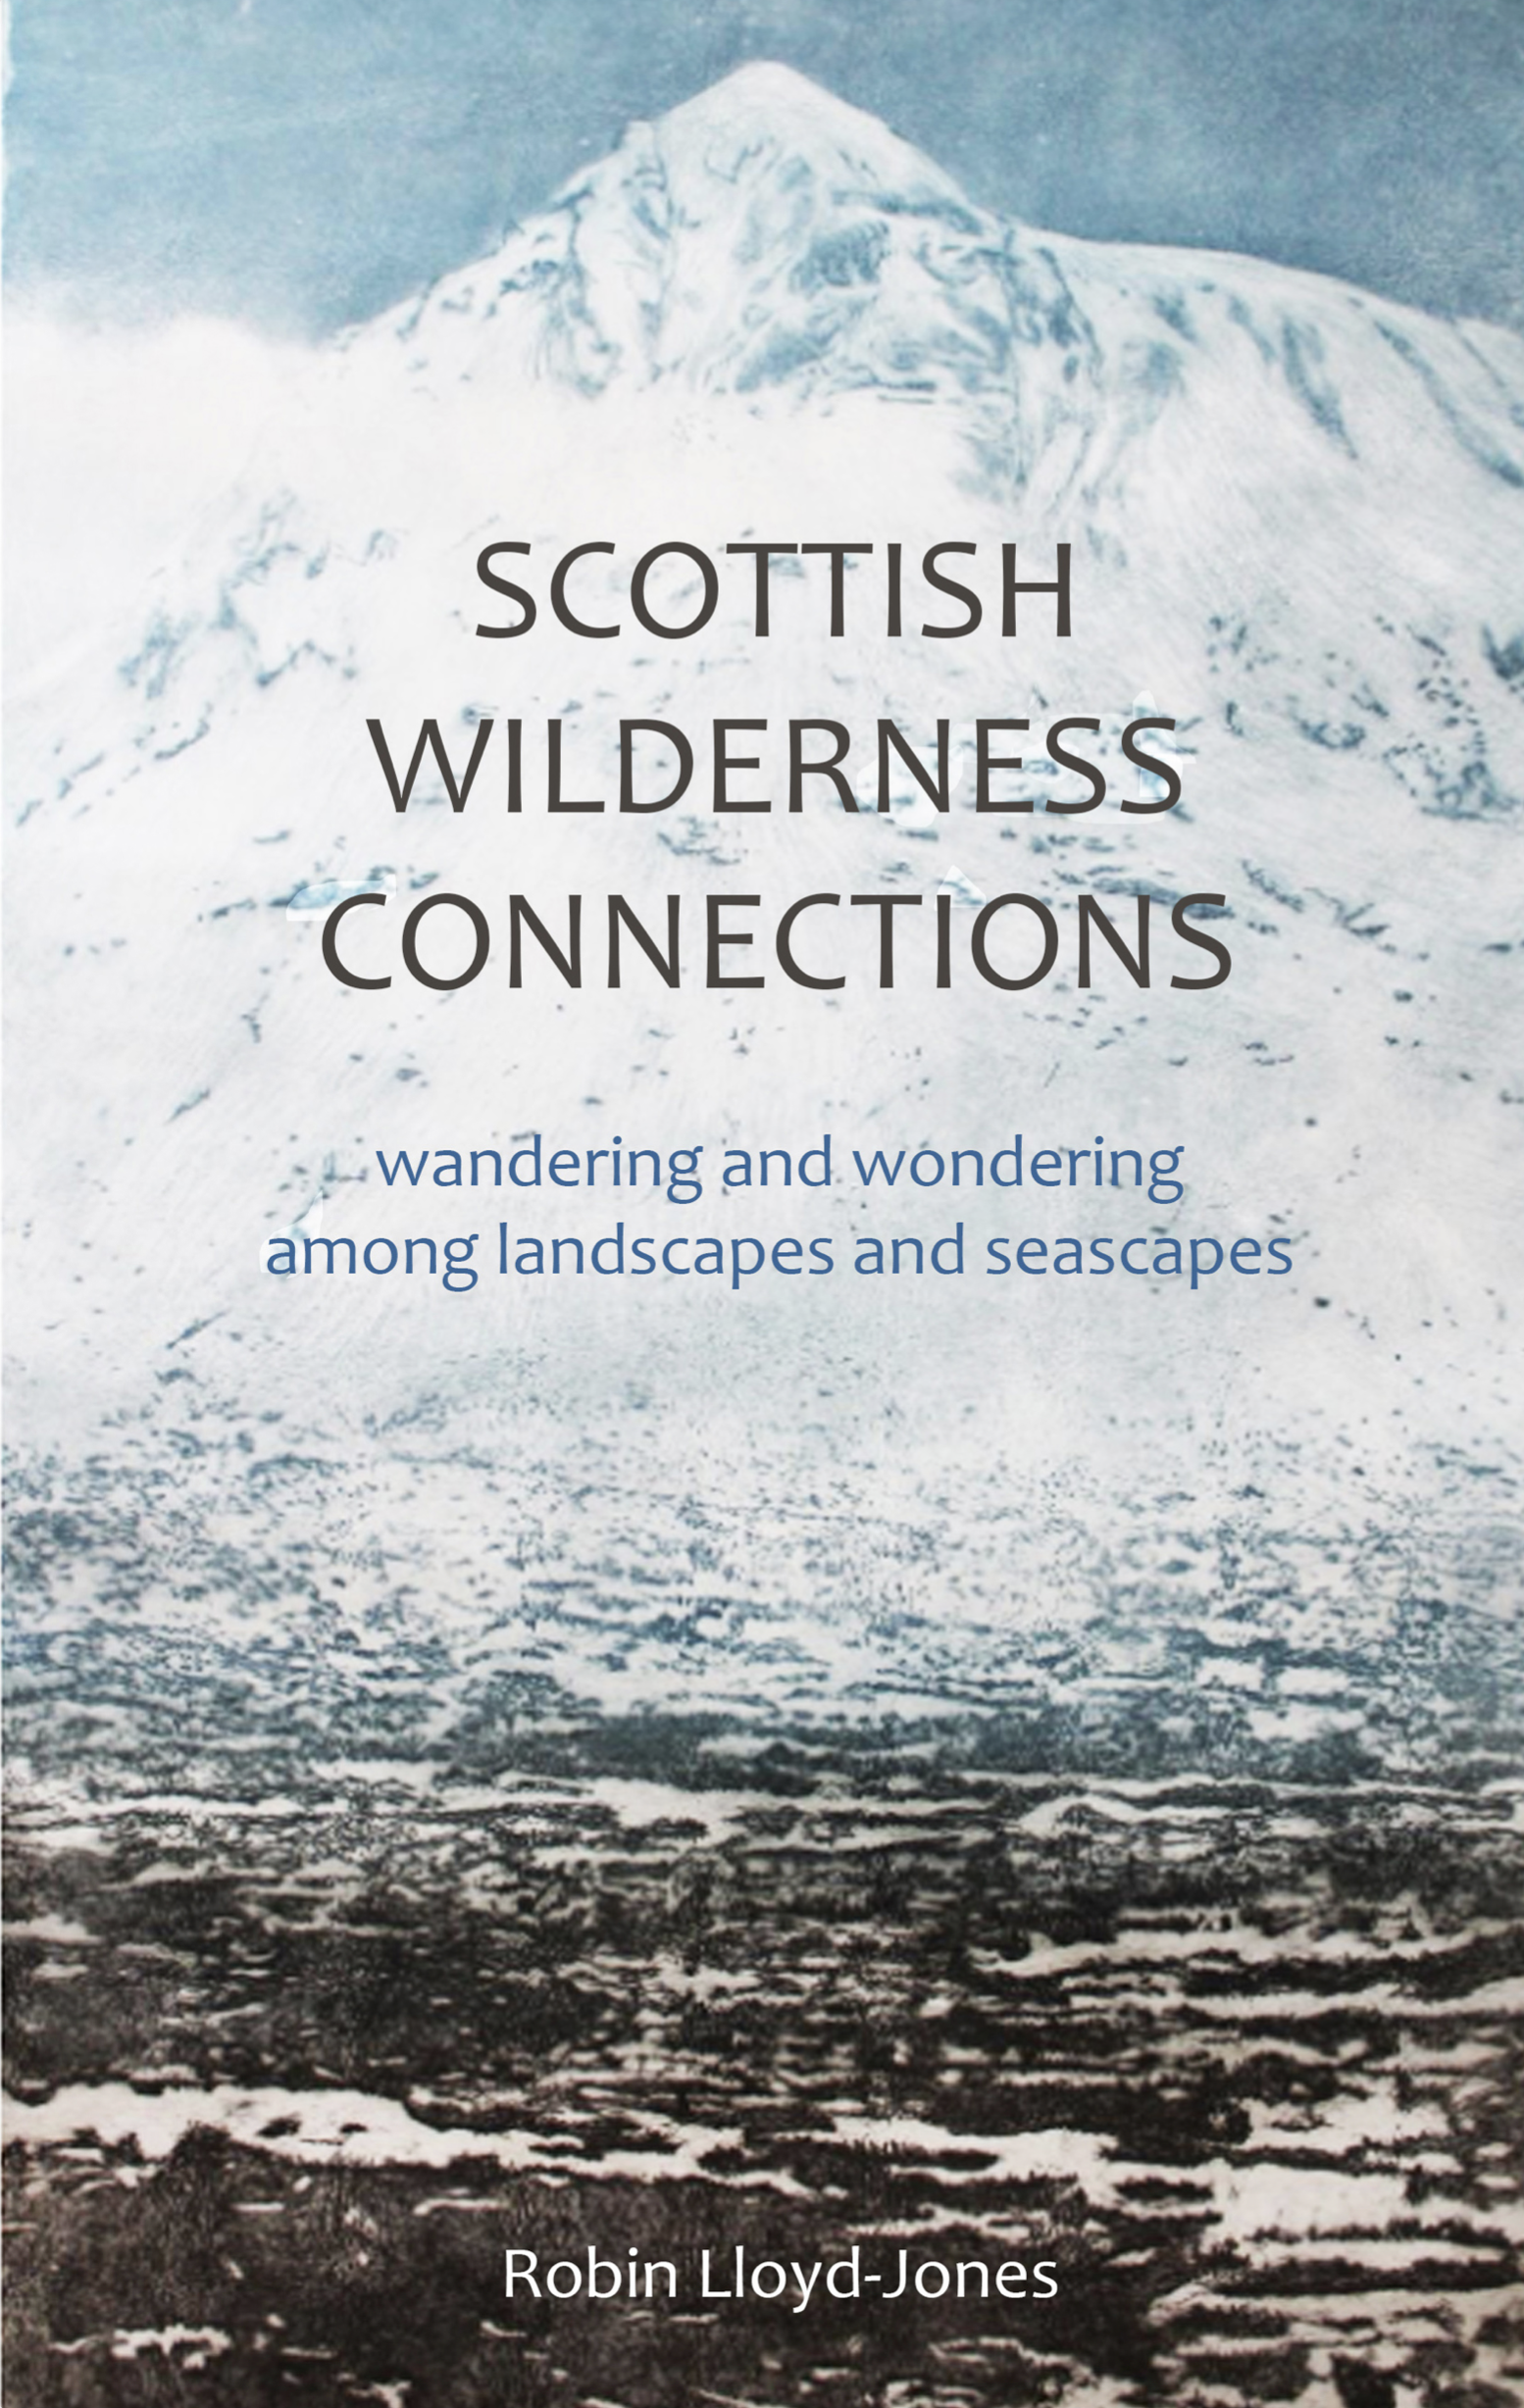 Scottish Wilderness Connections by Robin Lloyd-Jones The Tasker Prize Mountain Literature